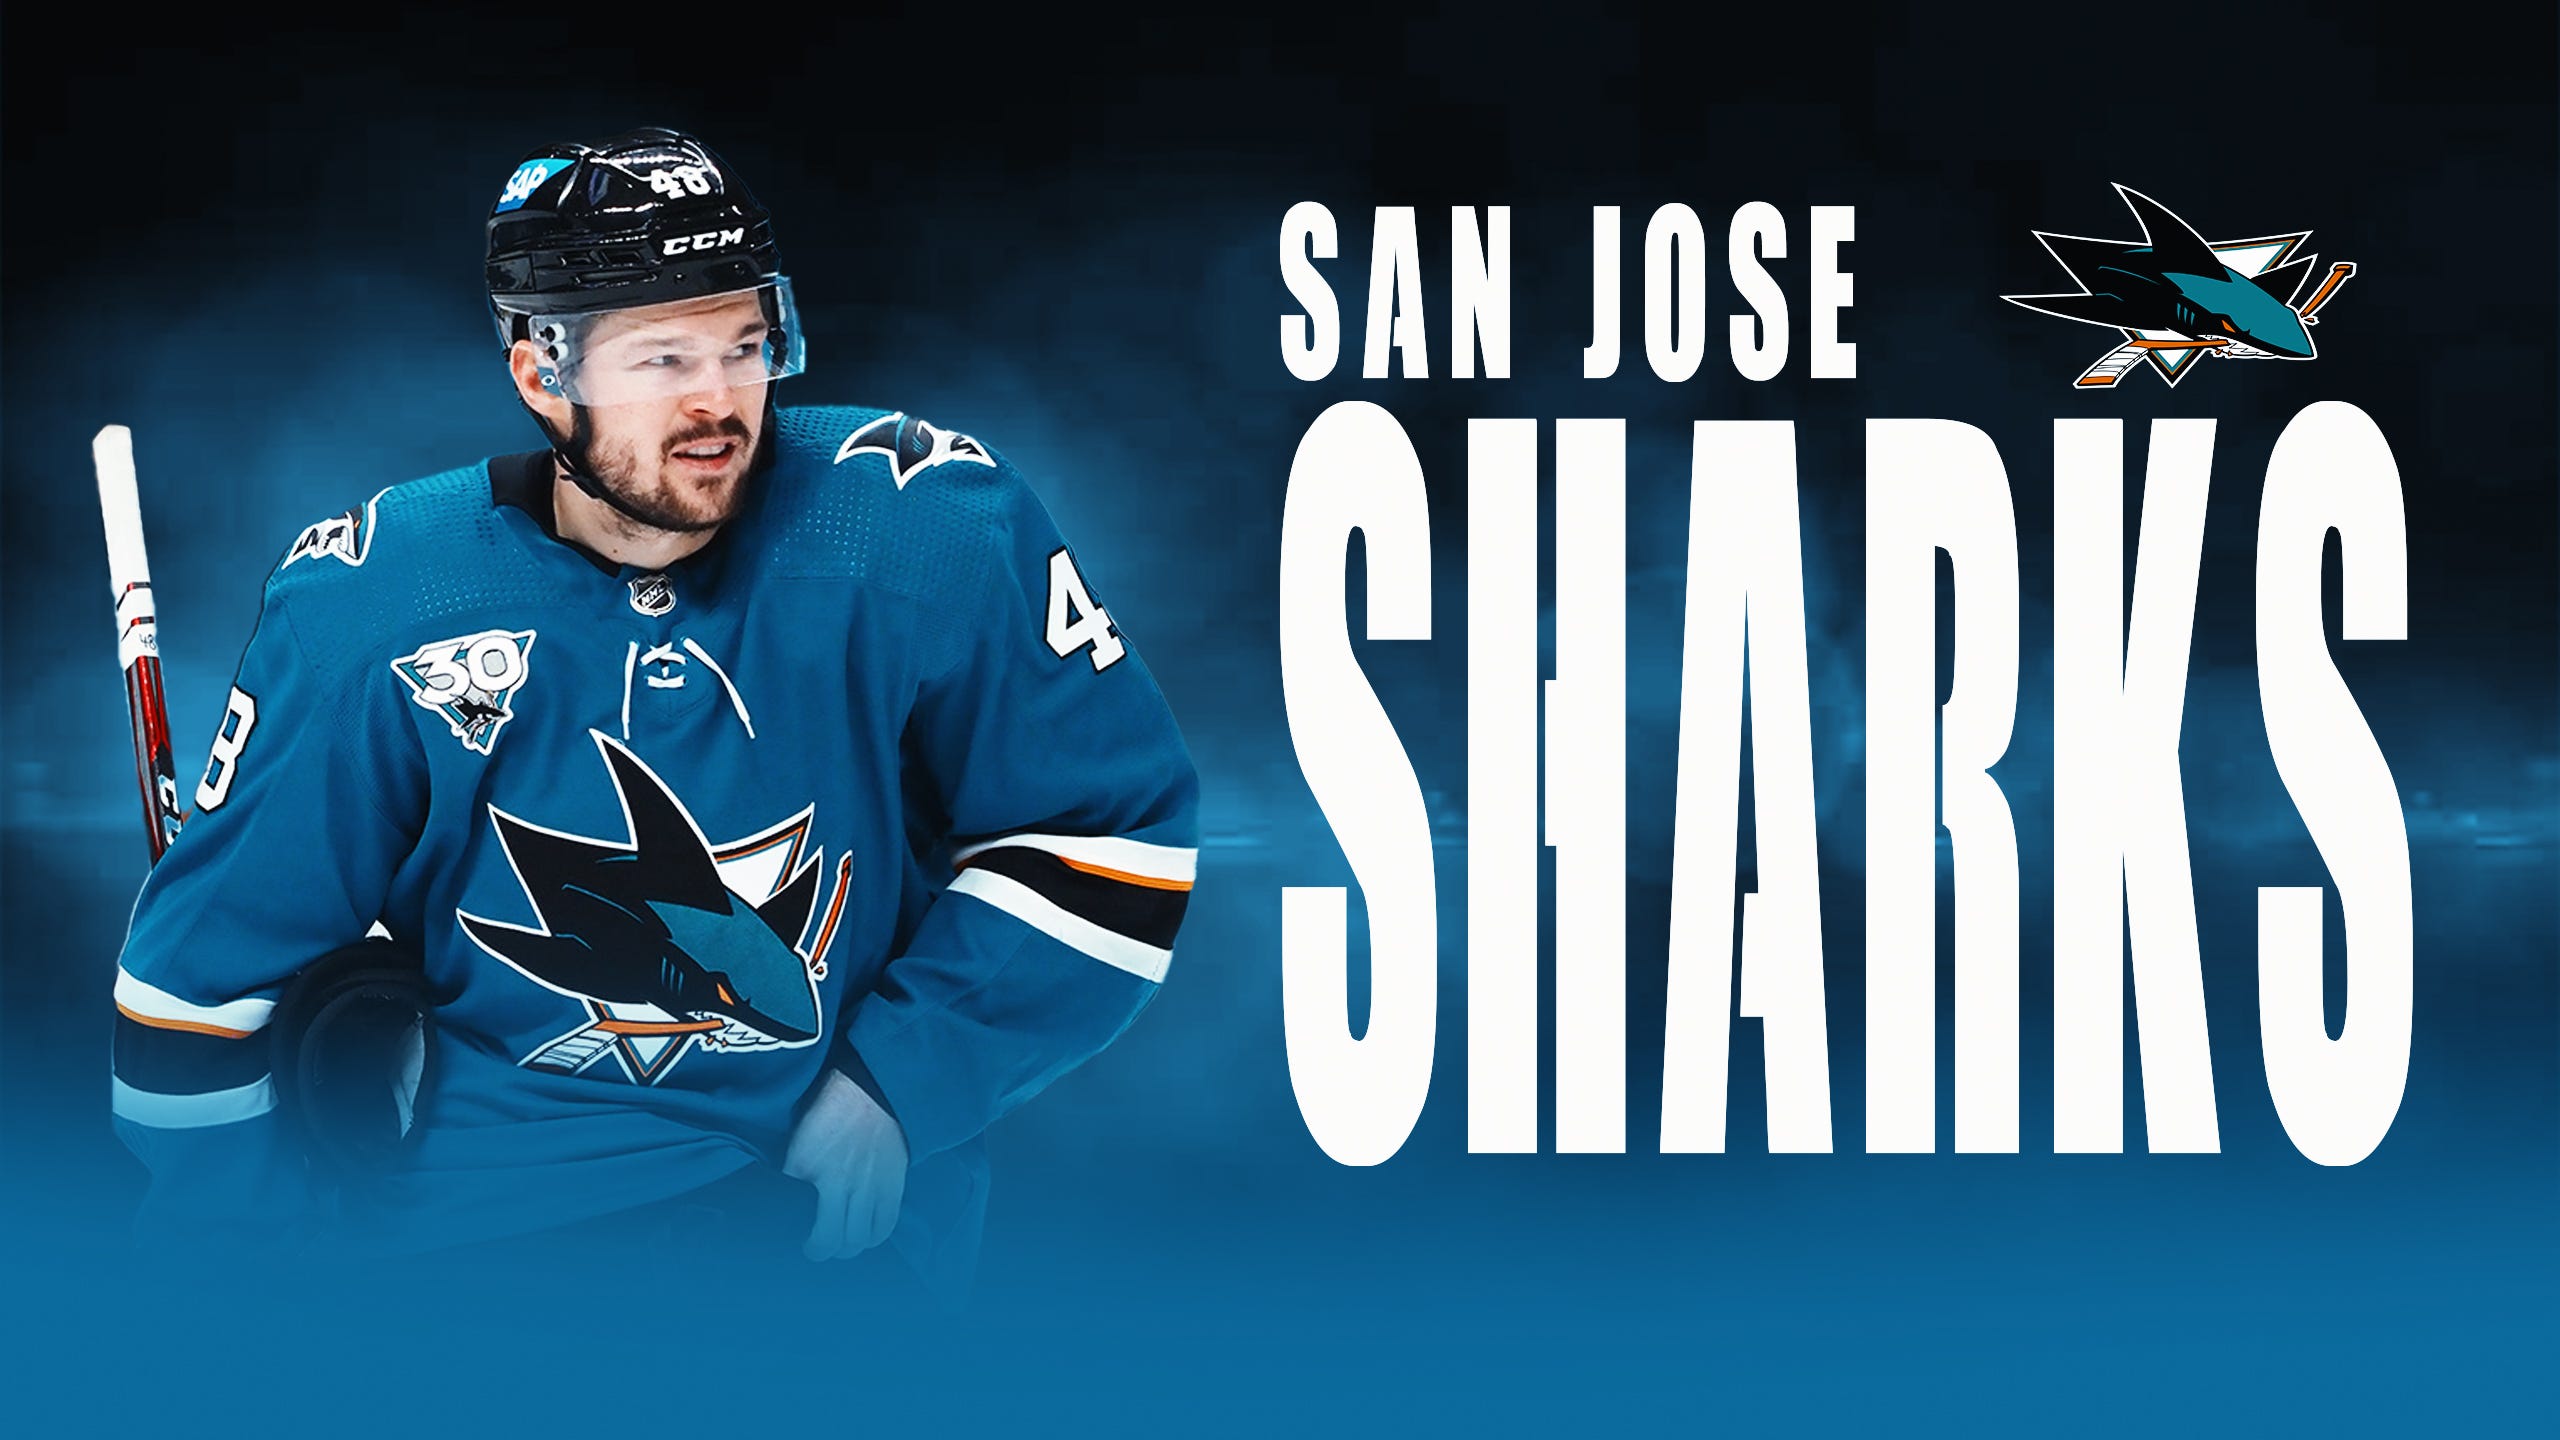 San Jose Sharks - How many sweaters were actually used in the